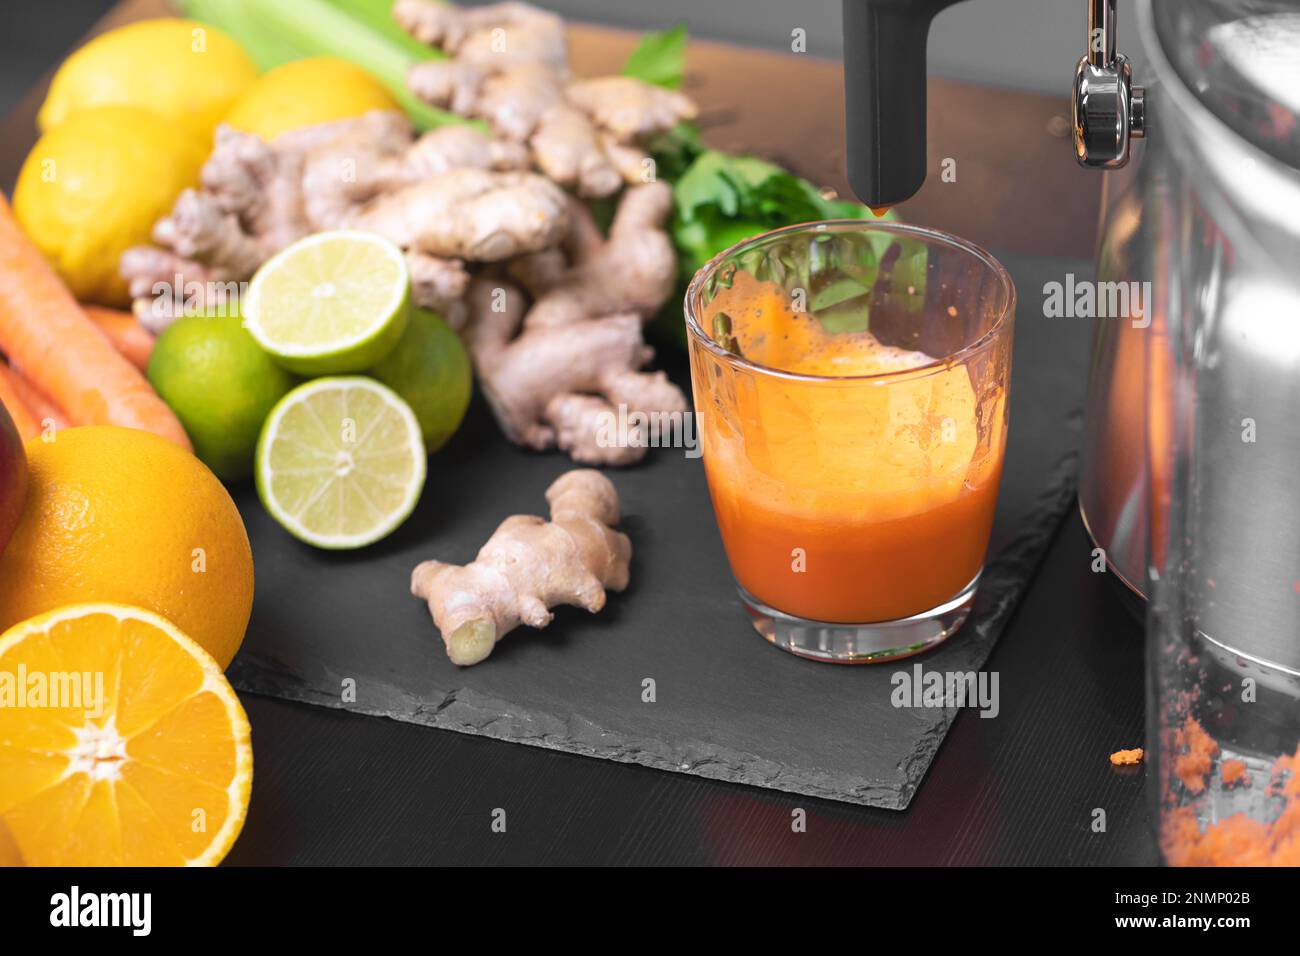 Squeezing carrot juice with juicer healthy citrus fruits in background. Intake vitamins detox, healthy diet and living concept. Stock Photo